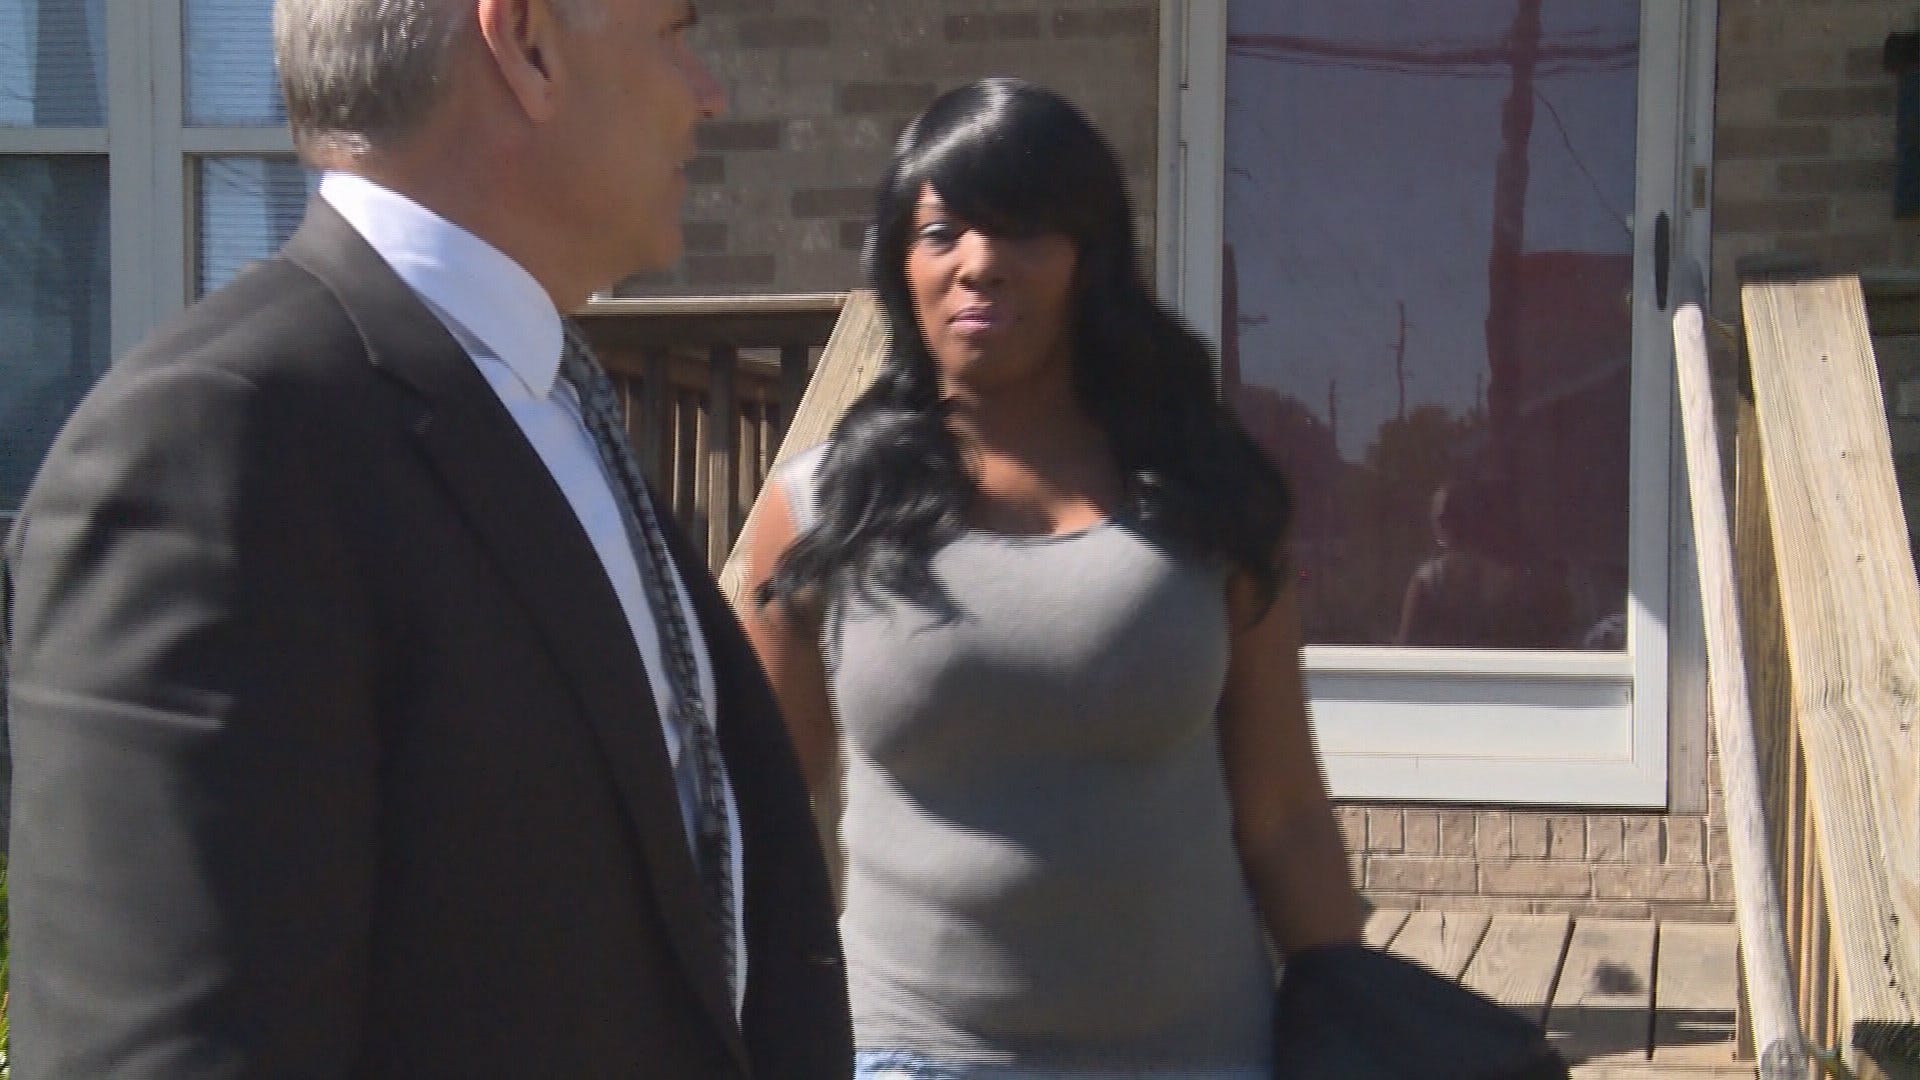 Police are investigating Louisville 'Escort Queen' Katina Powell for alleged robbery